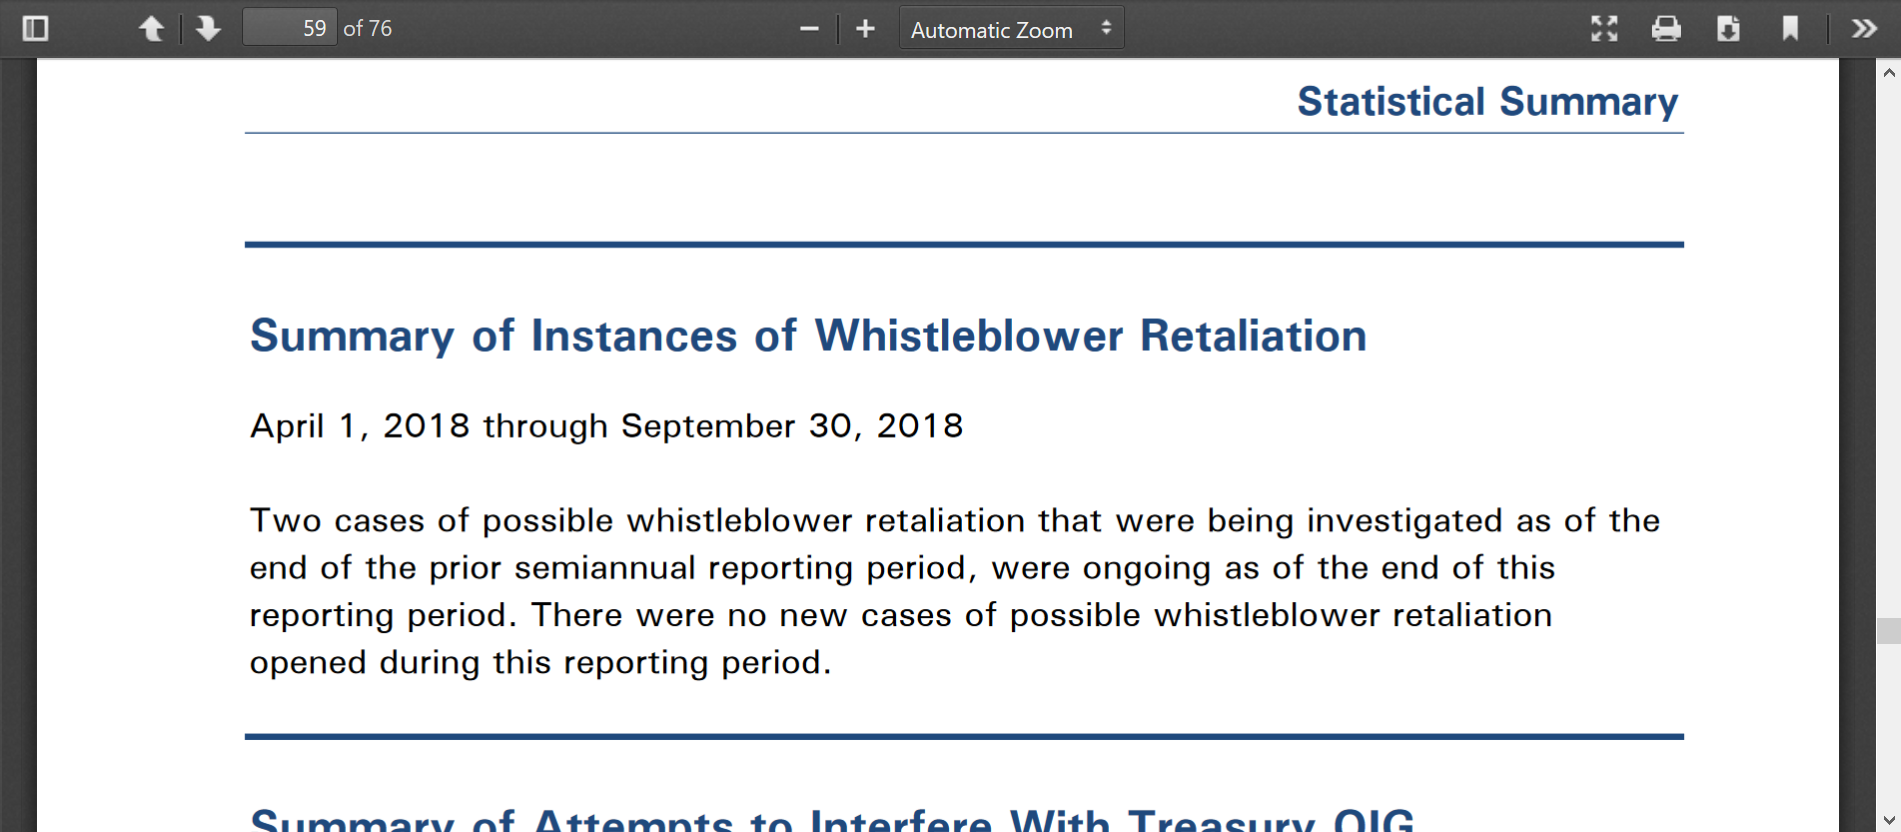 OIG Treasury Sept 2018 76 pages whistleblowers.png